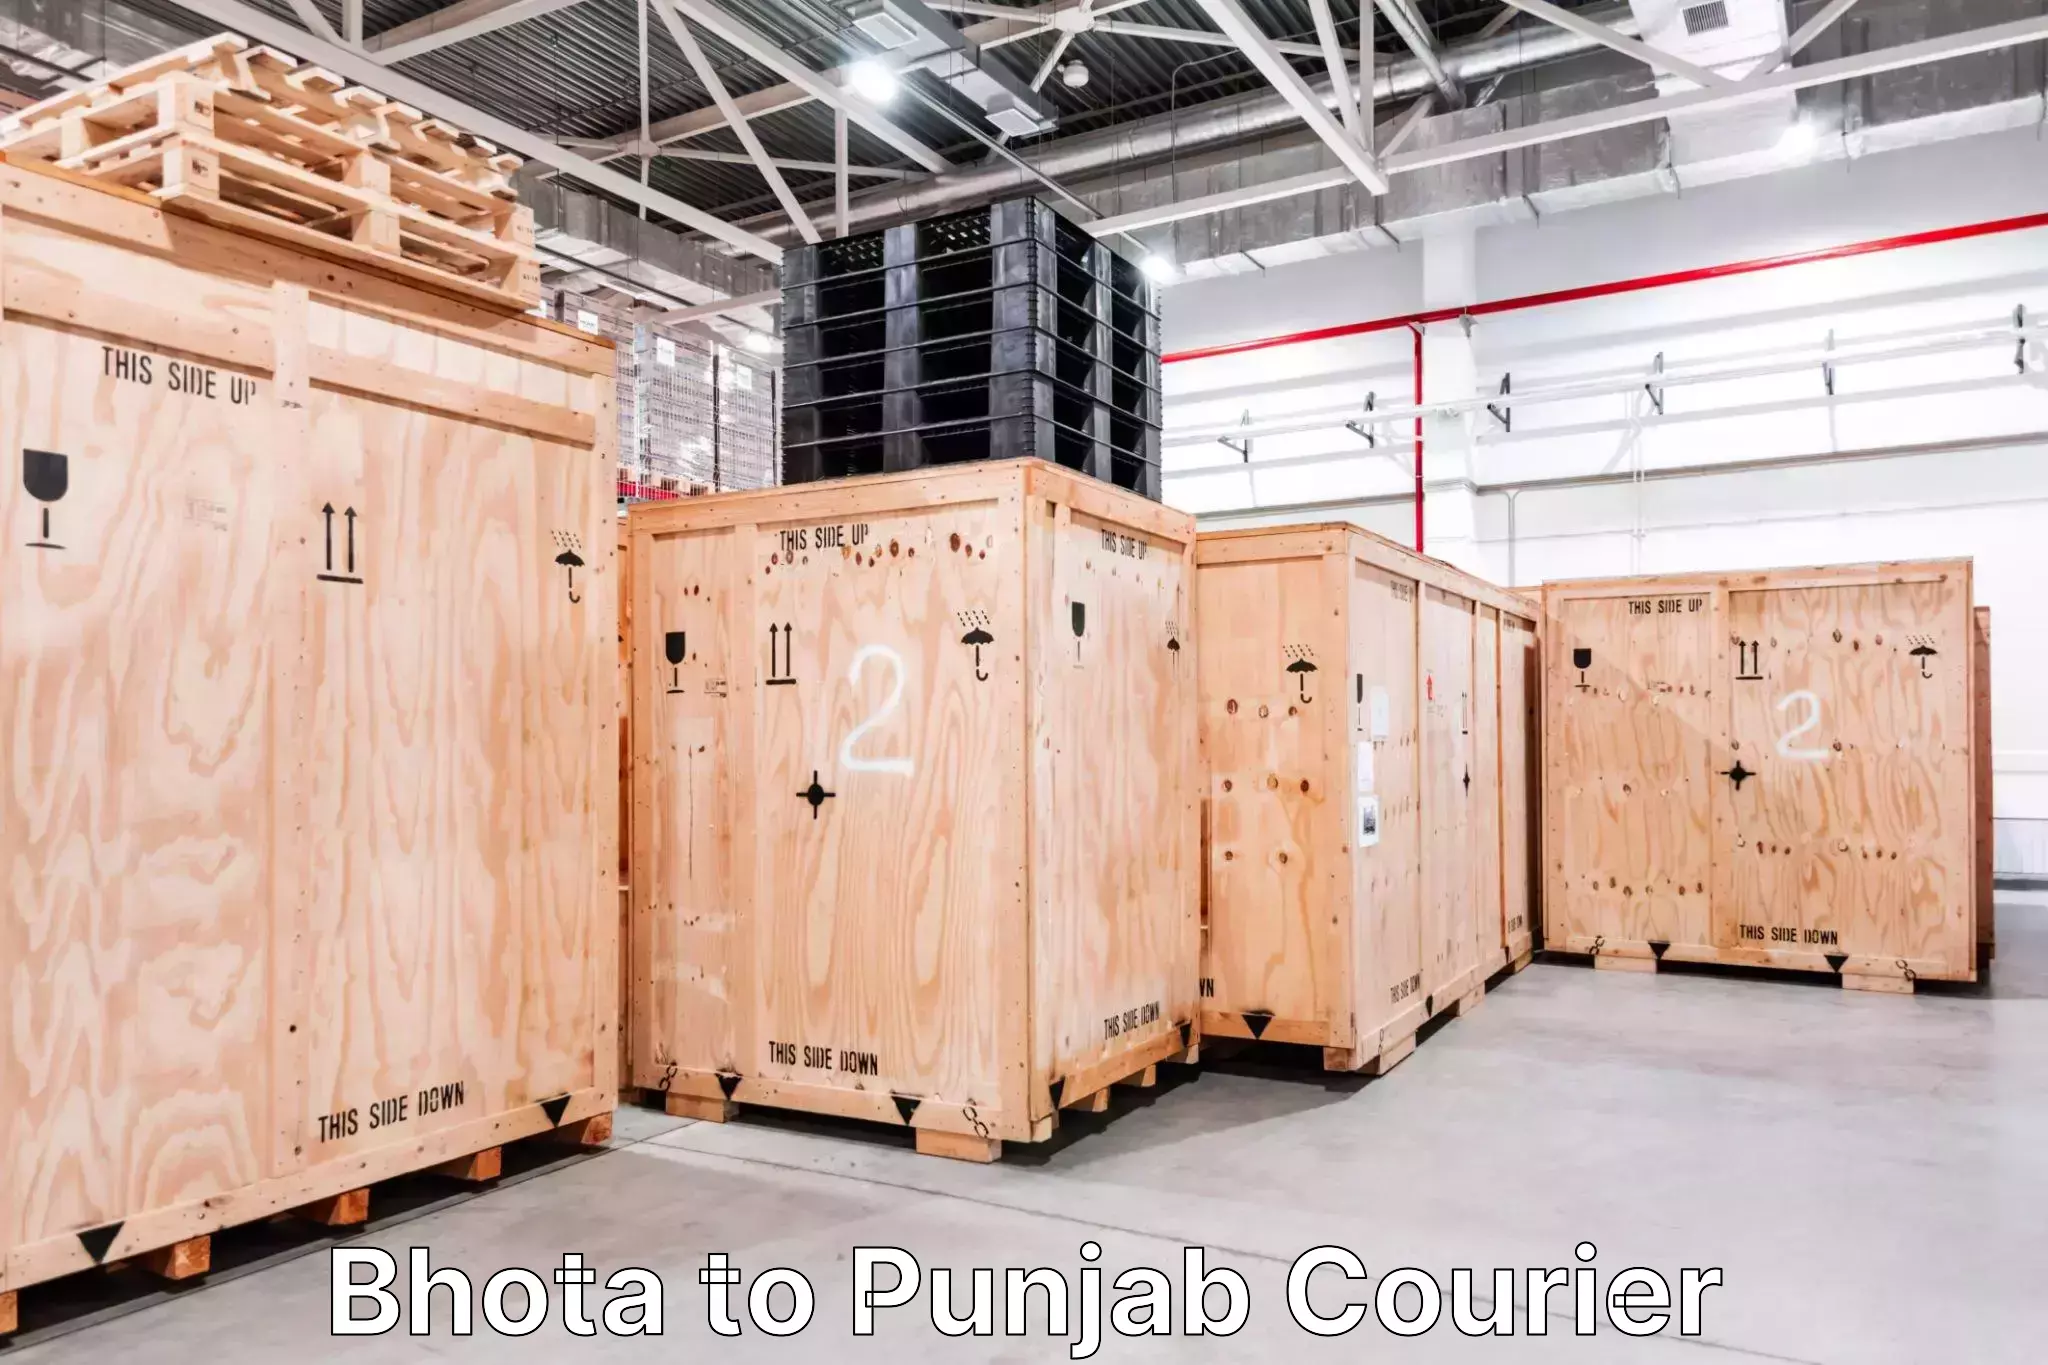 Luggage delivery system Bhota to Punjab